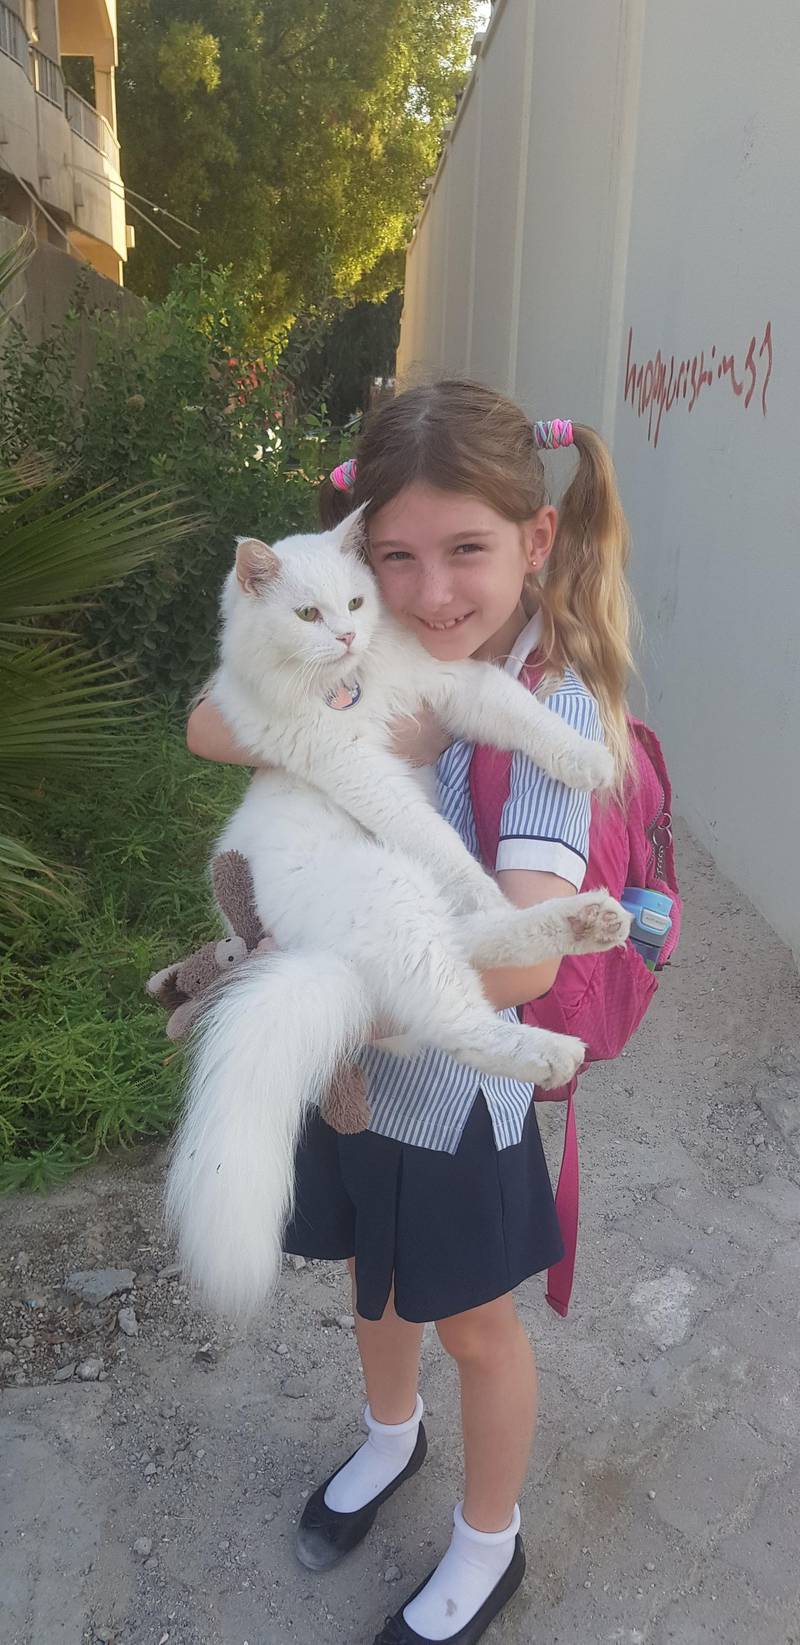 Roberta, a former pupil at Abu Dhabi's British School Al Khubairat, with her cat Whistley